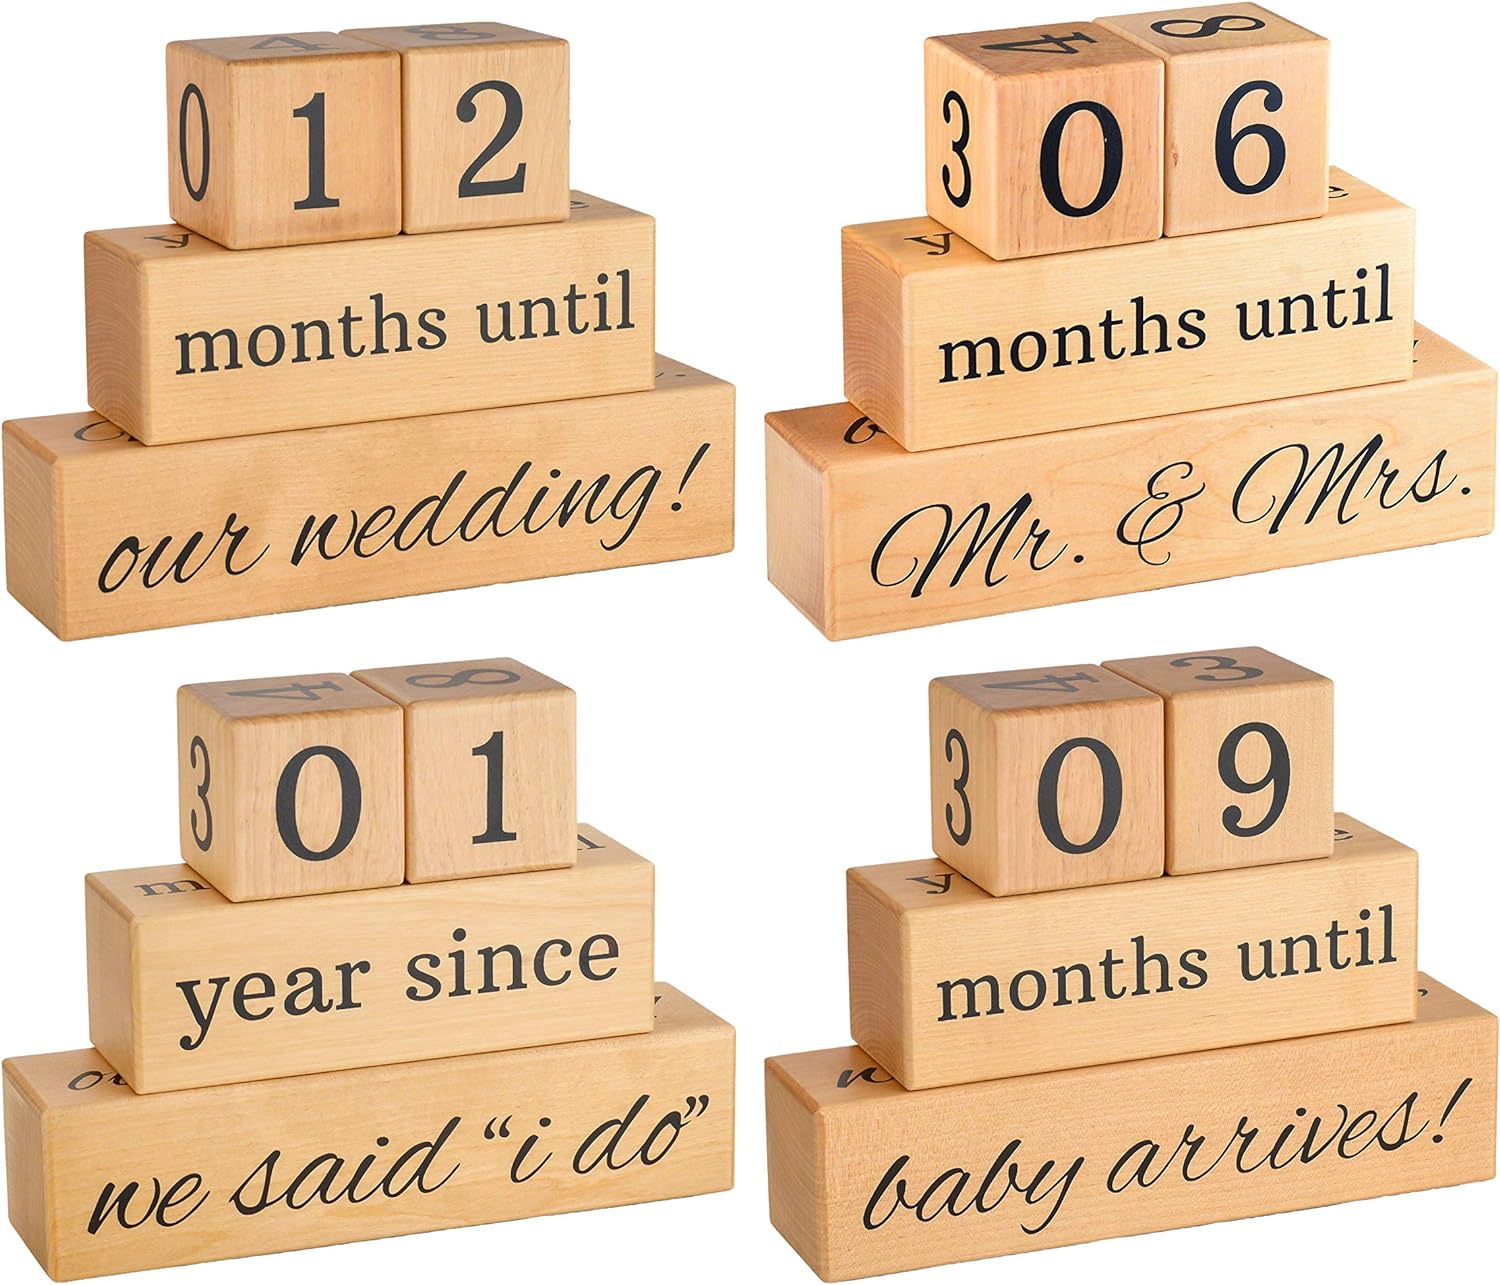 Wedding Countdown Calendar Wooden Blocks Engagement Gifts for Couples 